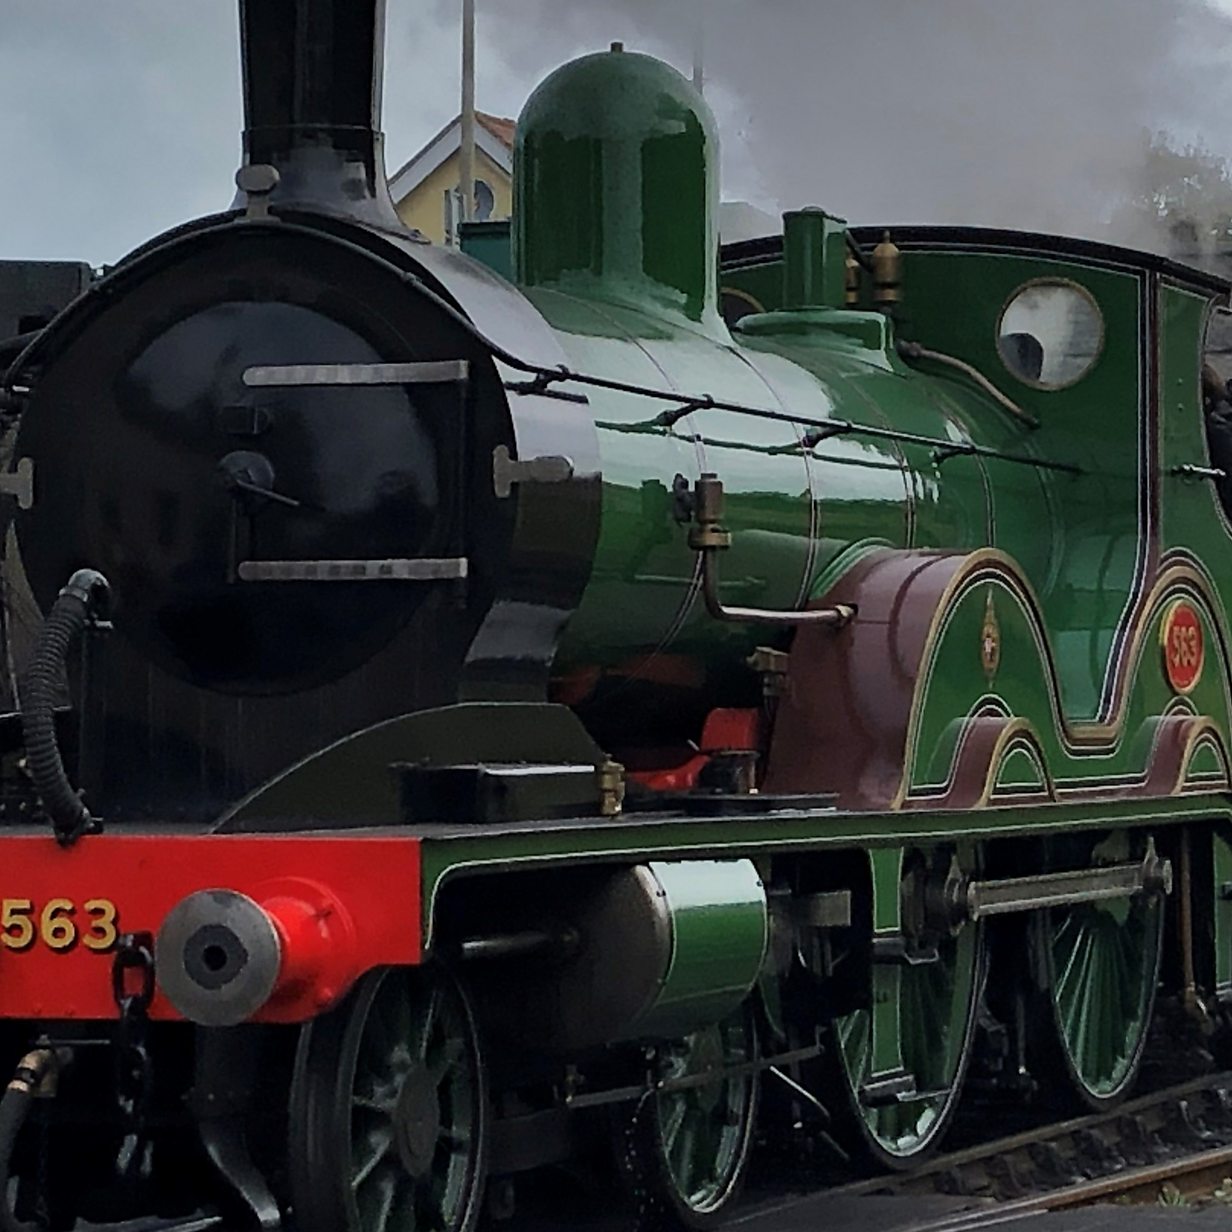 T3 class No. 563 returns to action on Swanage Railway after restoration